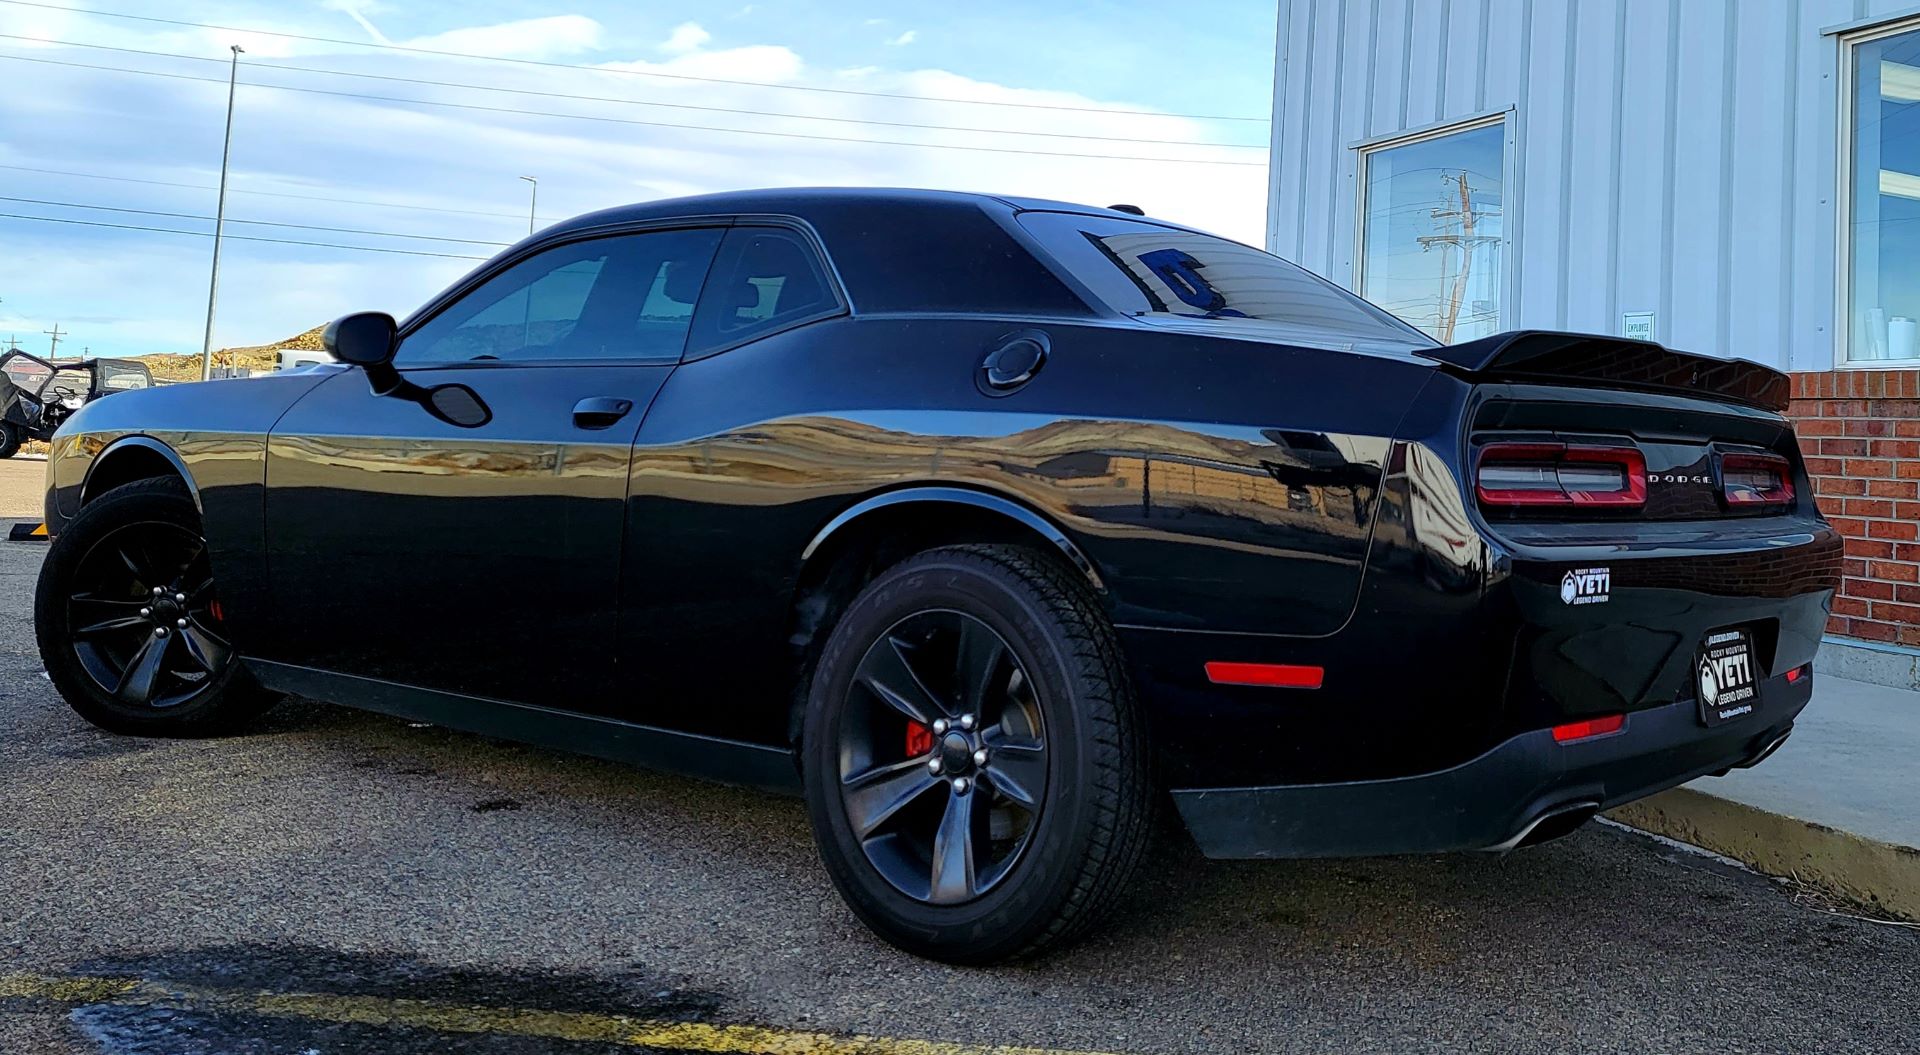 2018 Dodge Challenger in Rock Springs, Wyoming - Photo 7